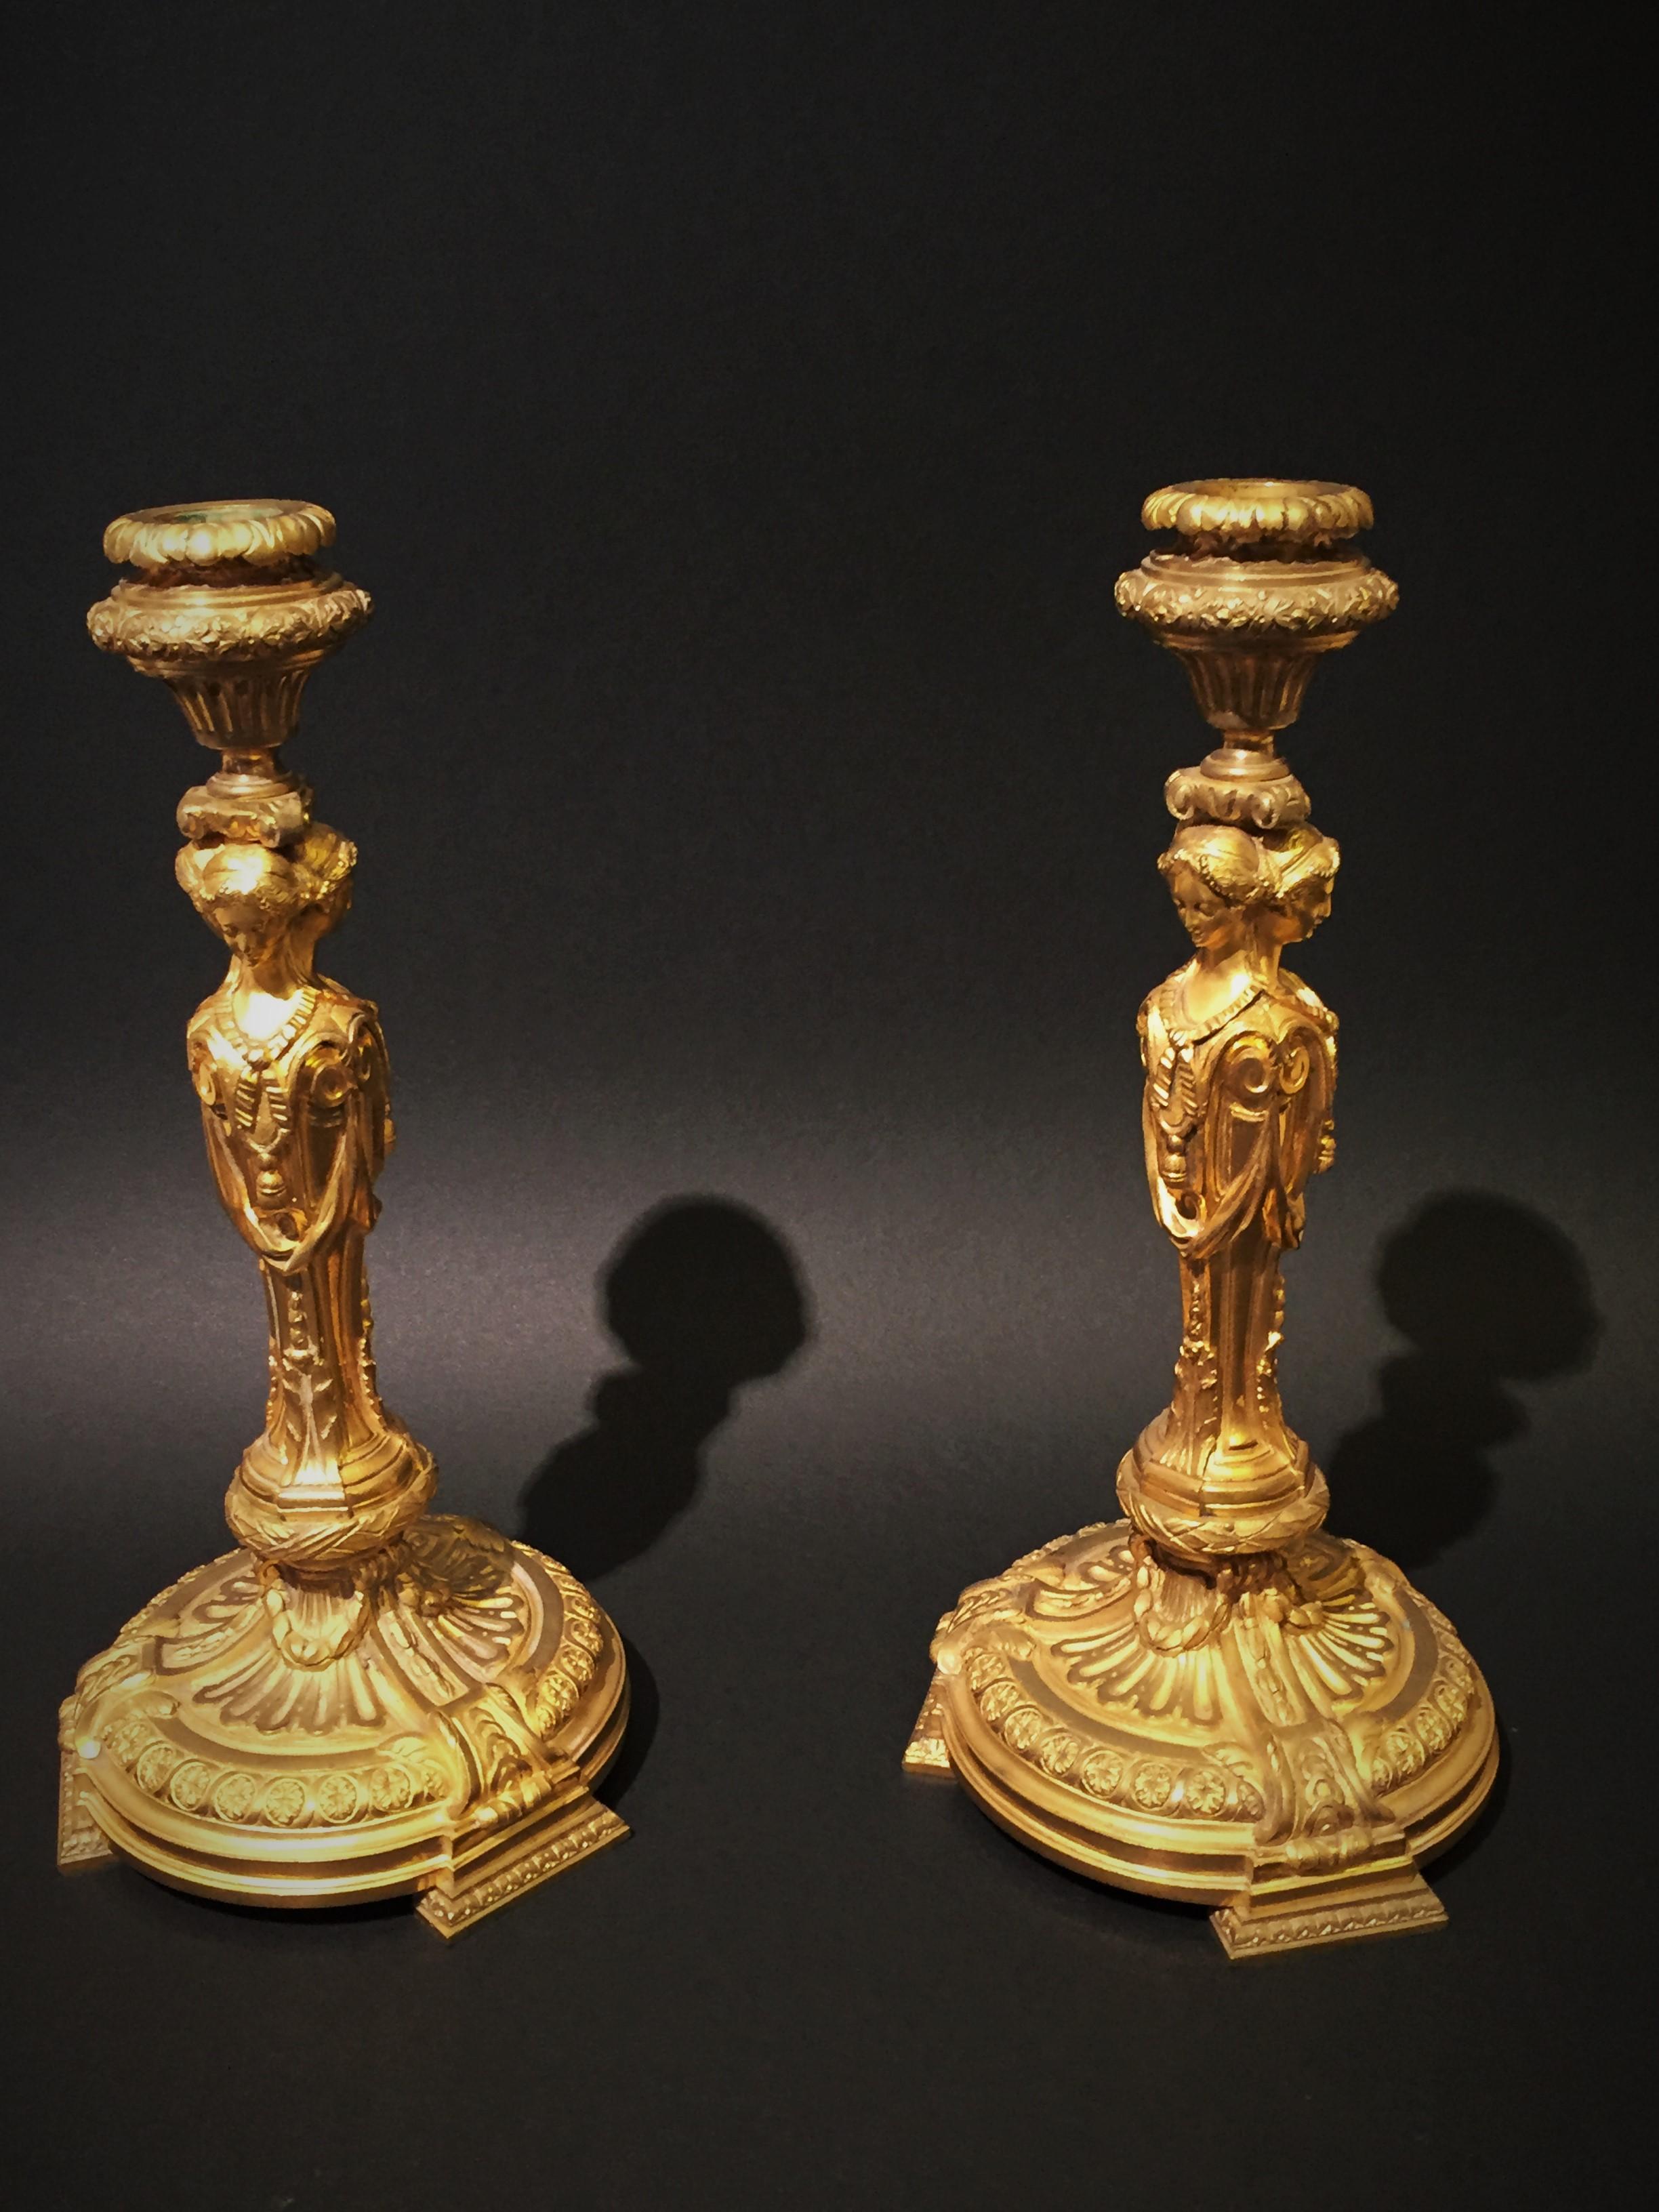 19th century, pair of French git bronze candlesticks with Vestals 

These two chiselled and gilt bronze candlesticks were made at the beginning of the 19th century and are inspired by the neoclassical taste that developed in France after 1750